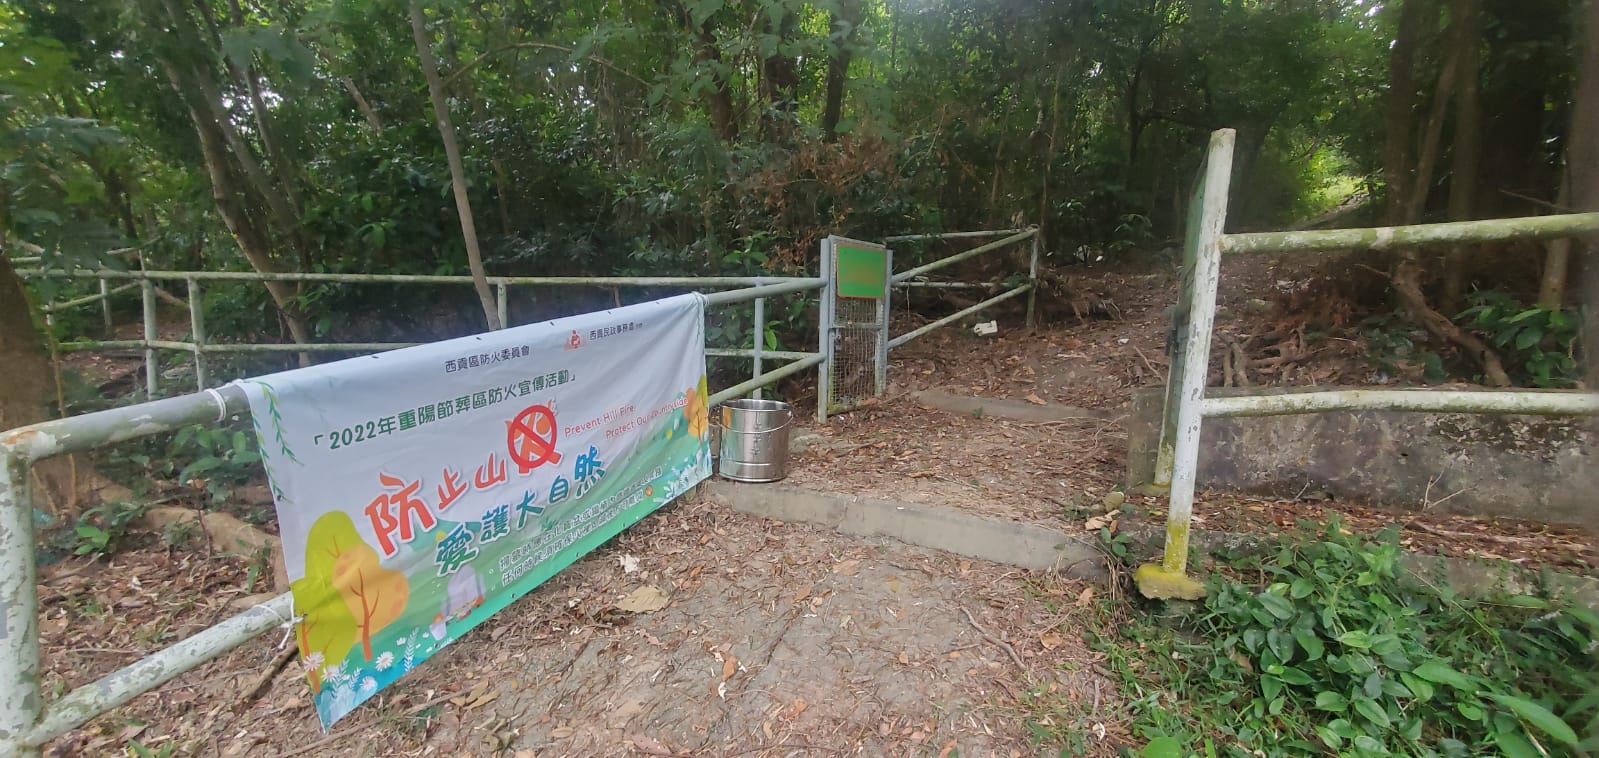 Hill Fire Prevention Promotion in Permitted Burial Grounds (PBGs) for Chung Yeung Festival 2022